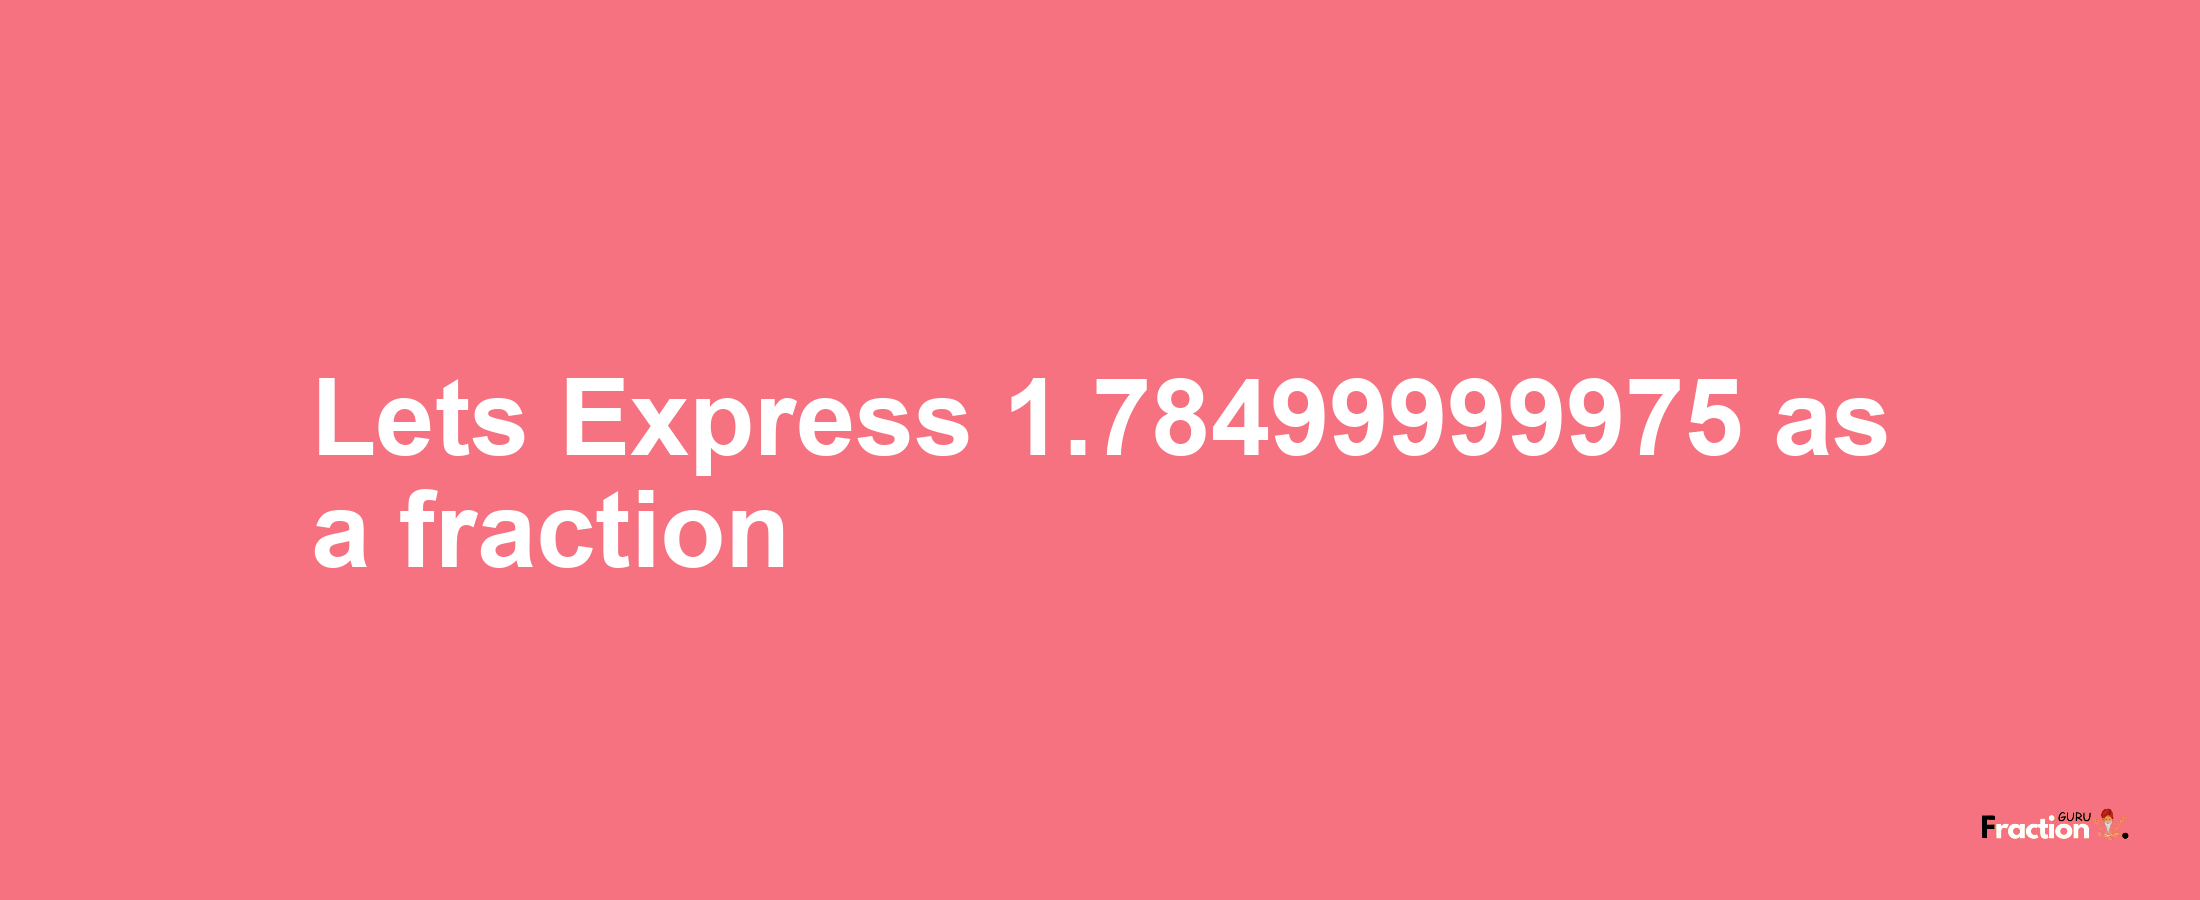 Lets Express 1.78499999975 as afraction